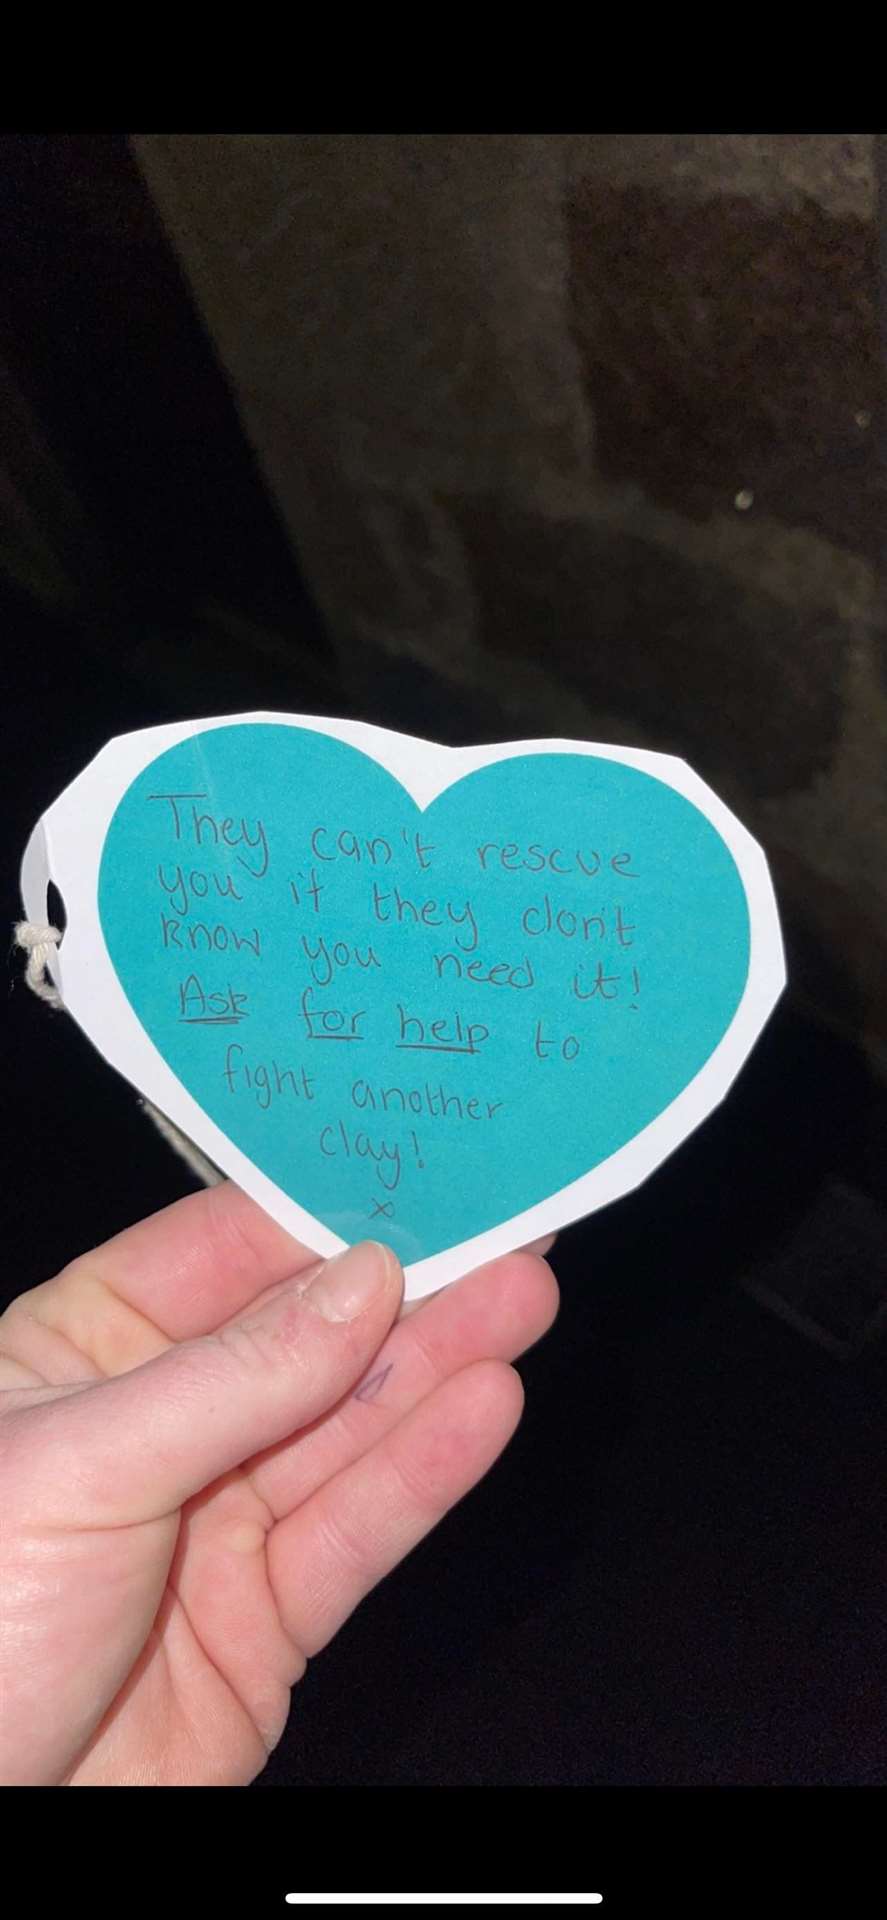 Mental health hearts are being shared around Huntly.